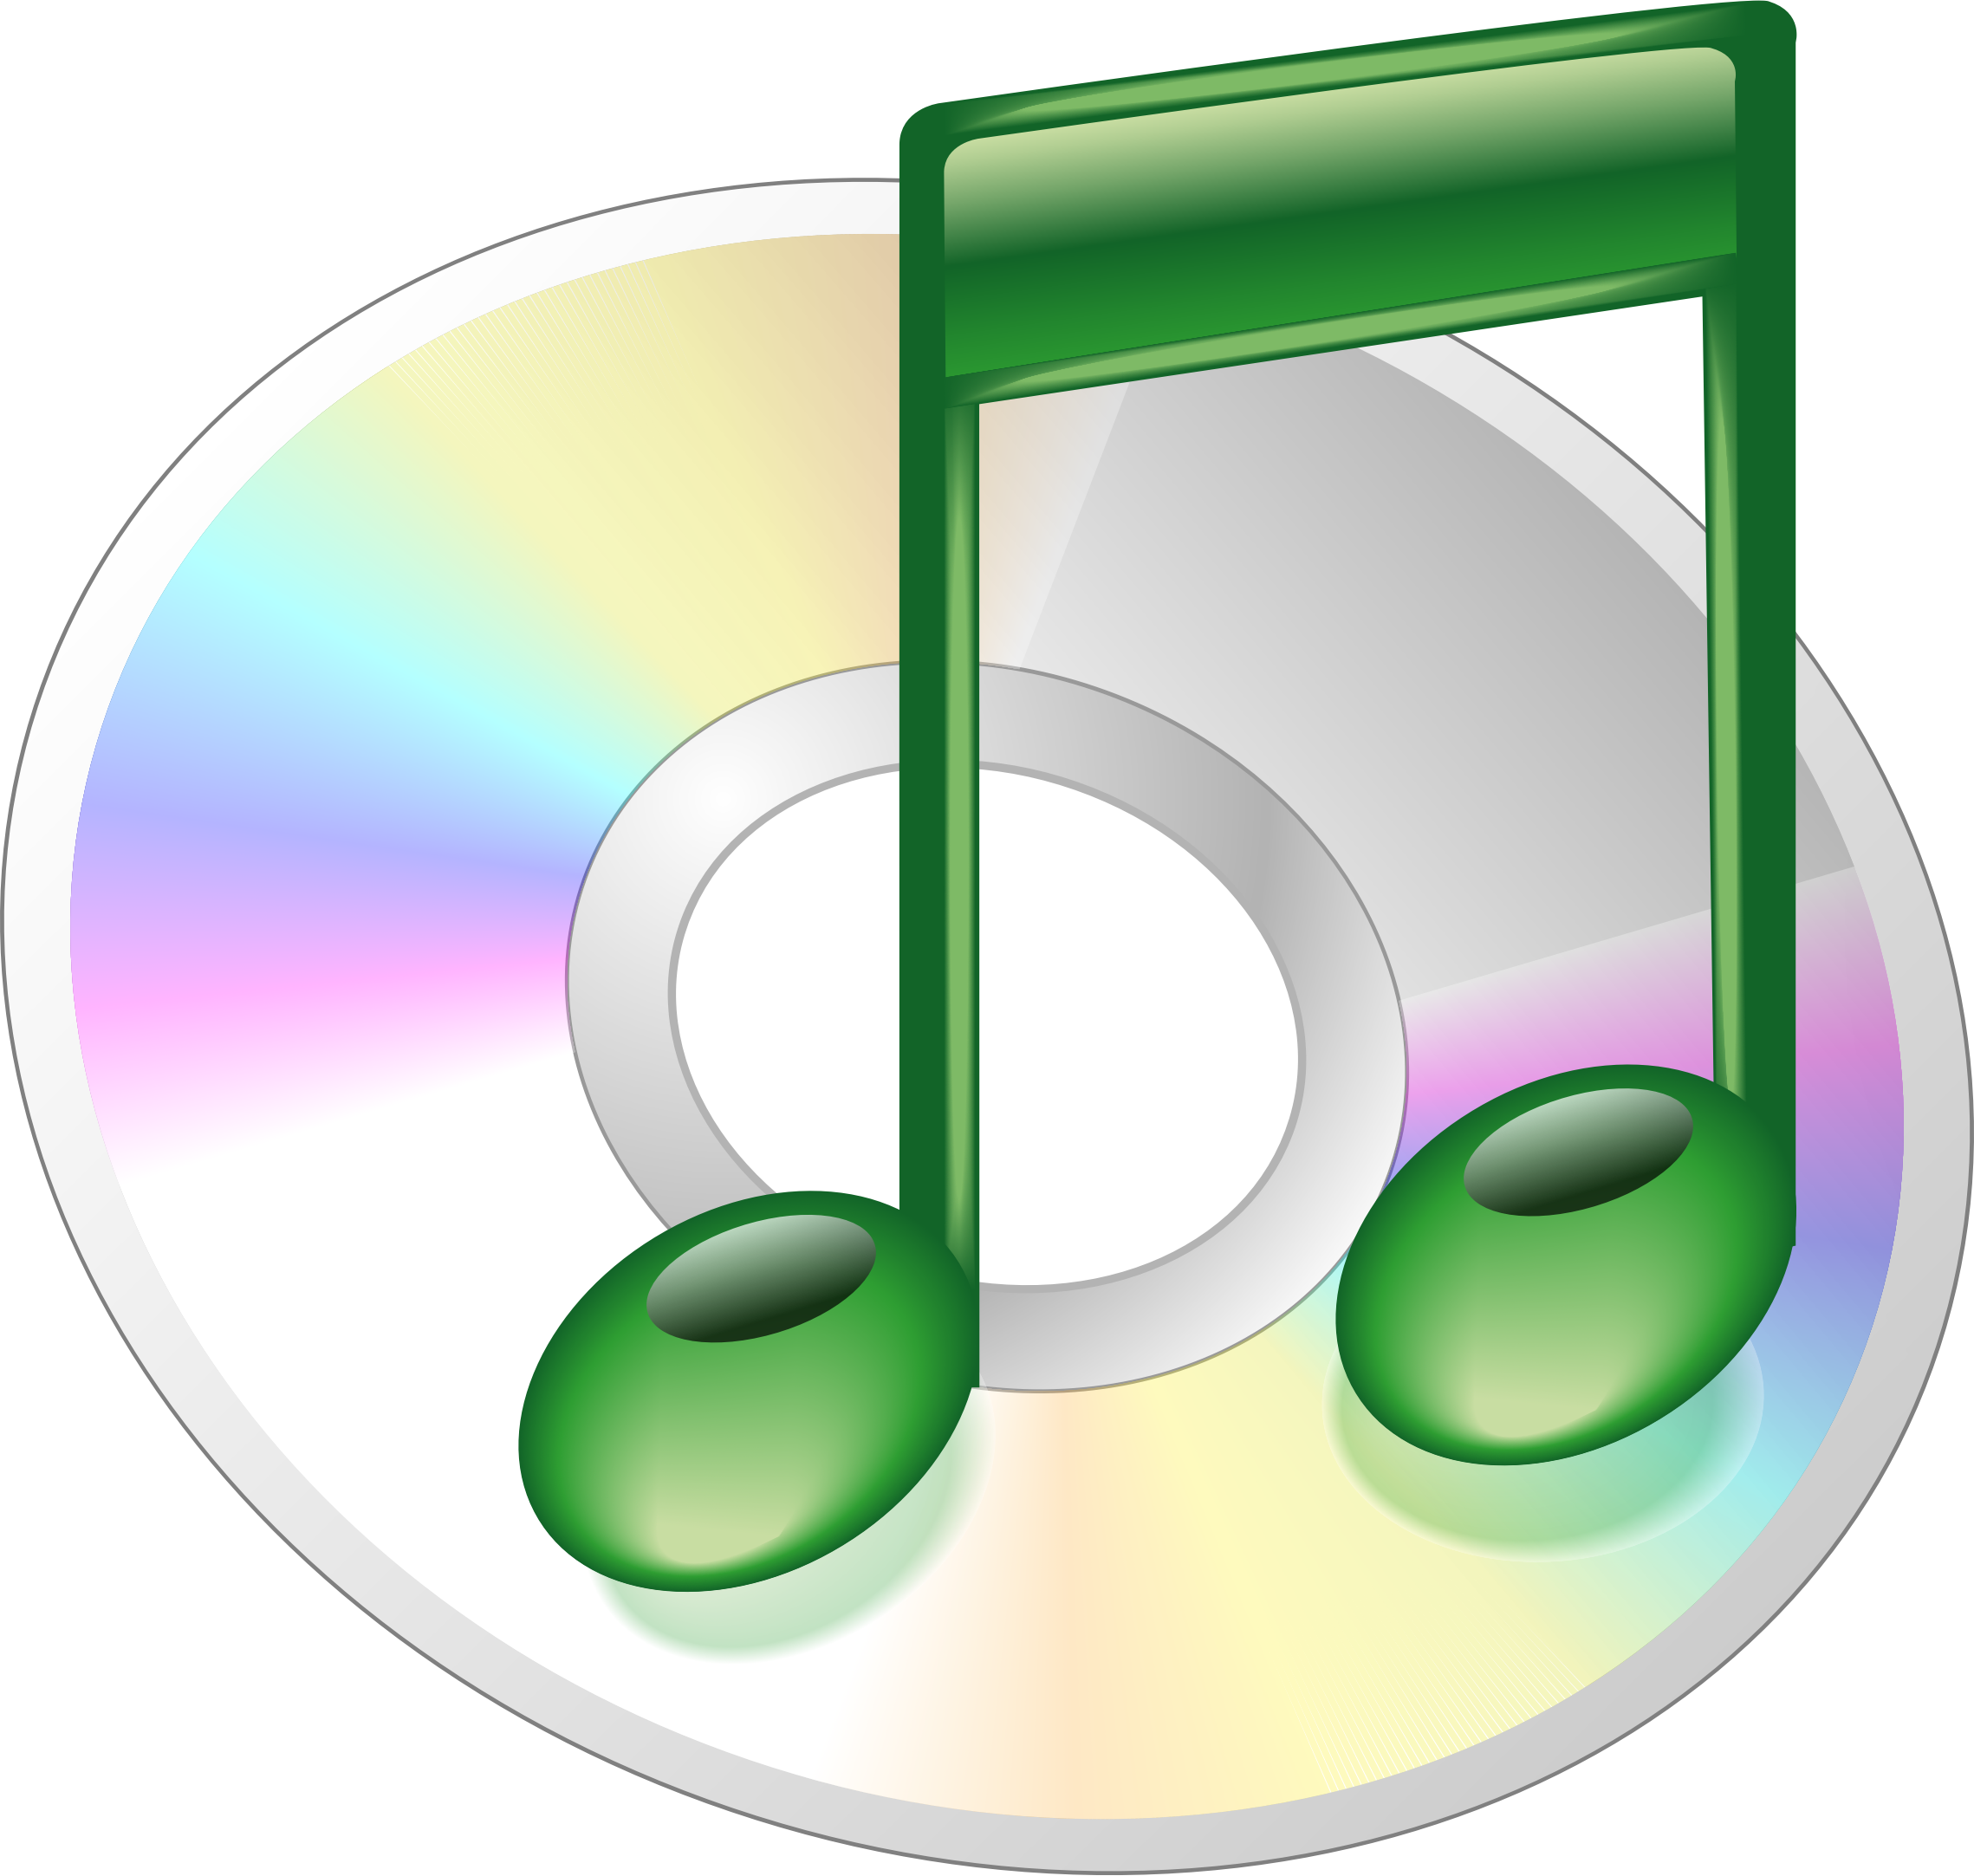 Free Music Disk Cliparts, Download Free Clip Art, Free Clip.